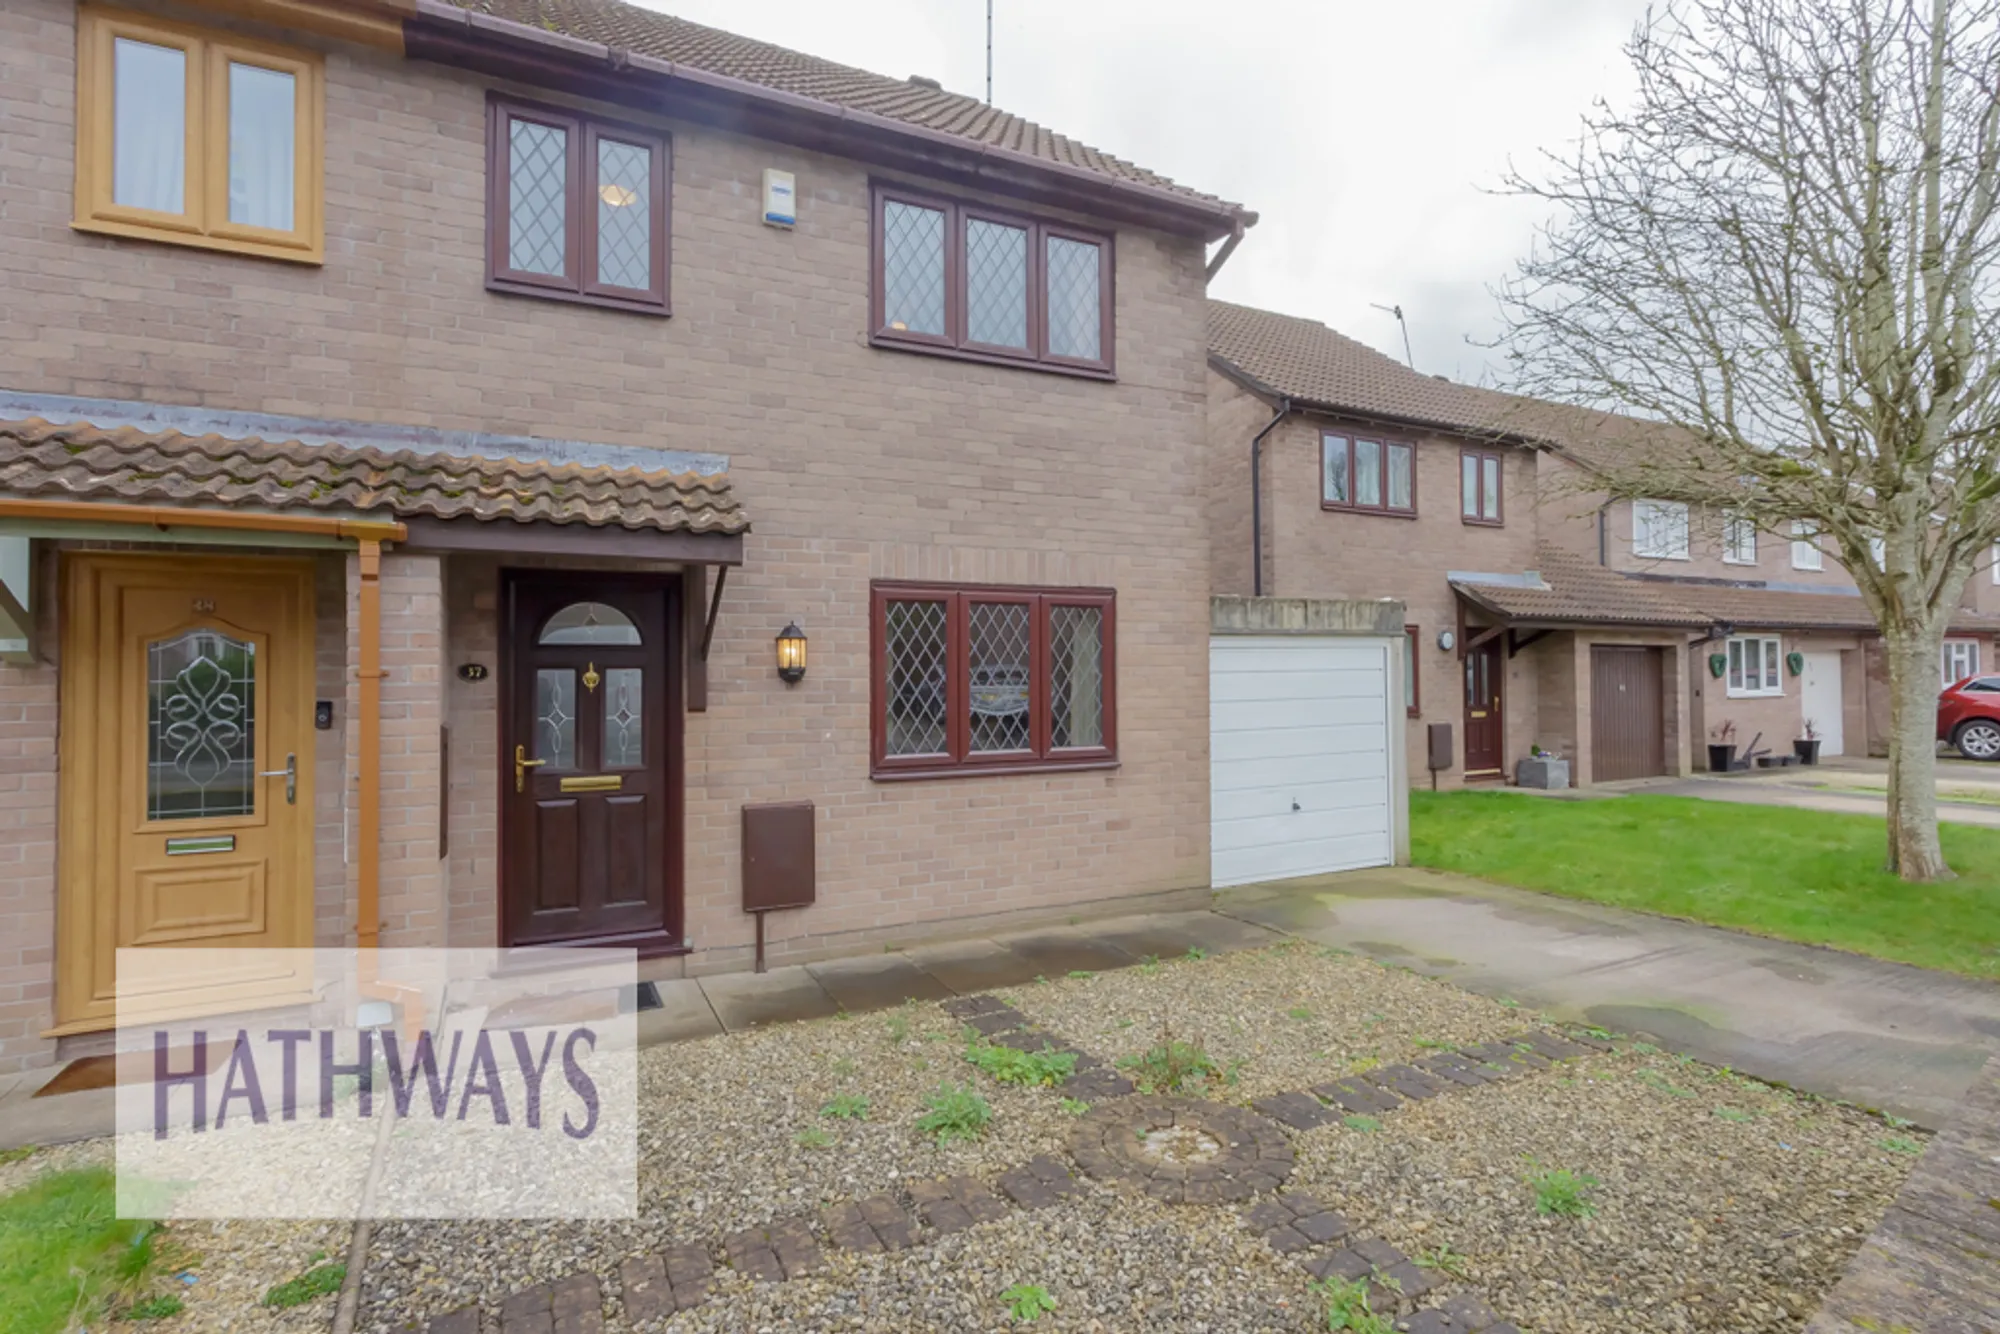 3 bed semi-detached house for sale in Forge Close, Newport - Property Image 1